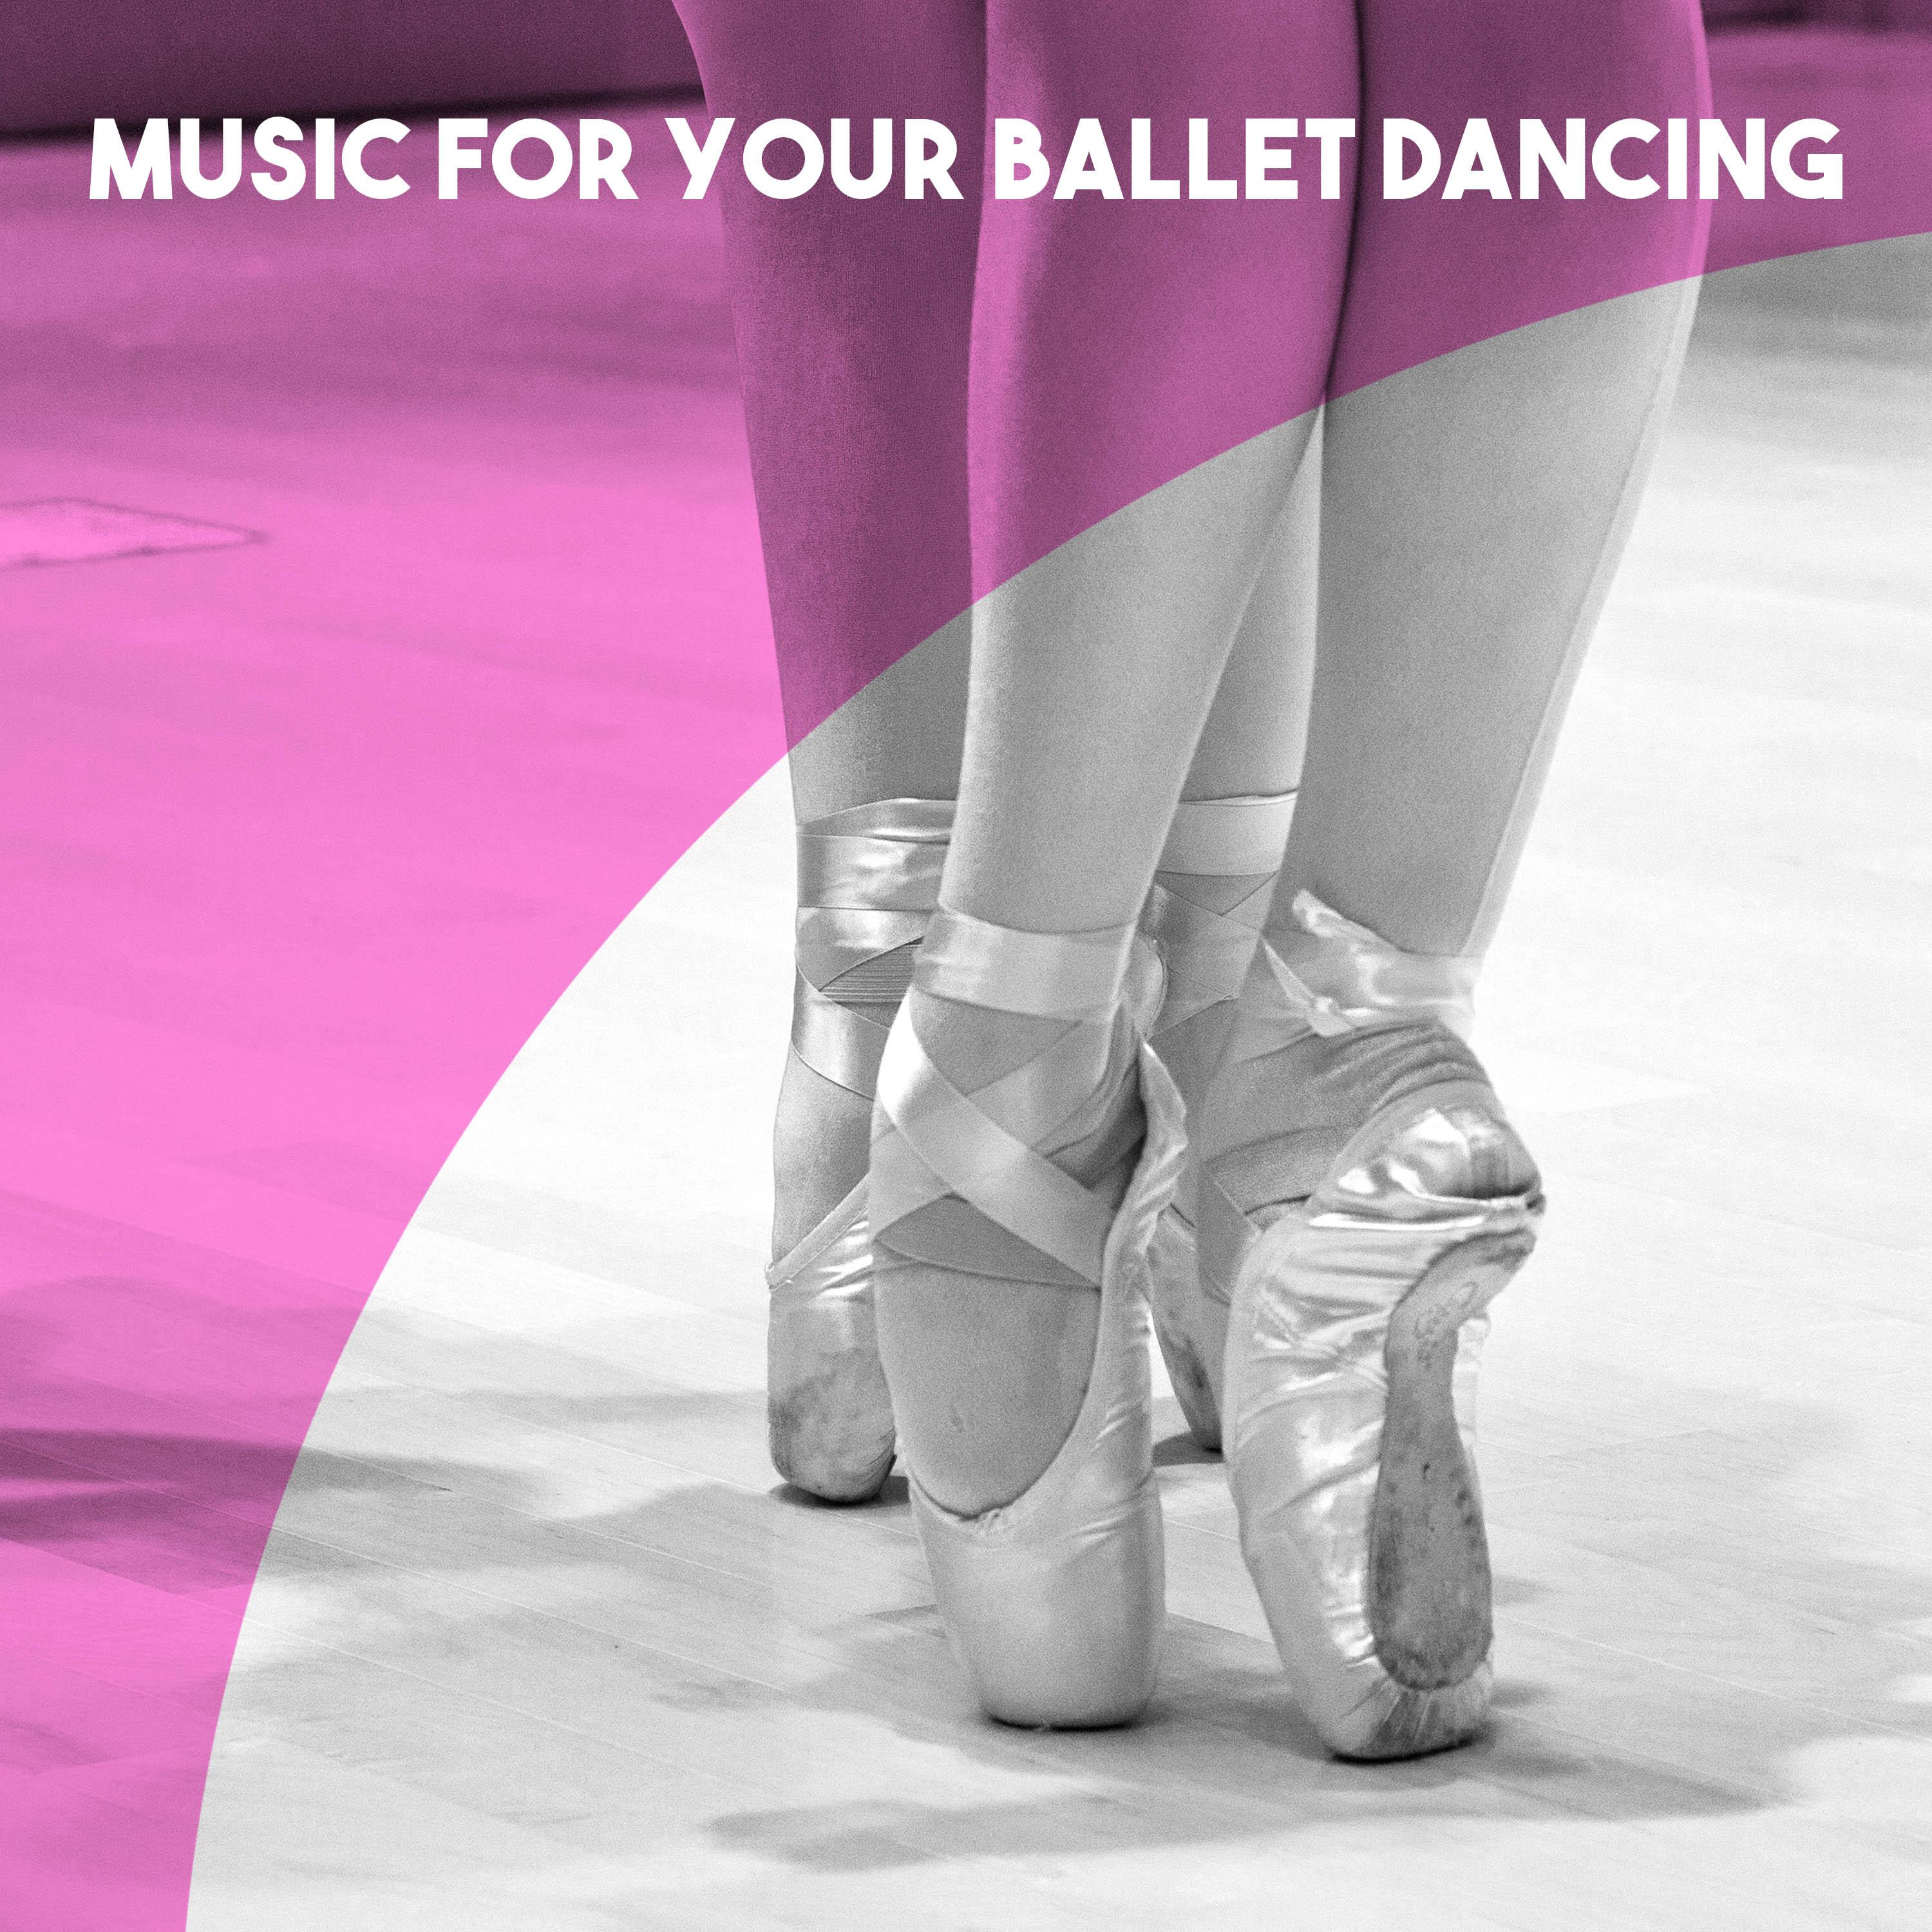 Music for Your Ballet Dancing